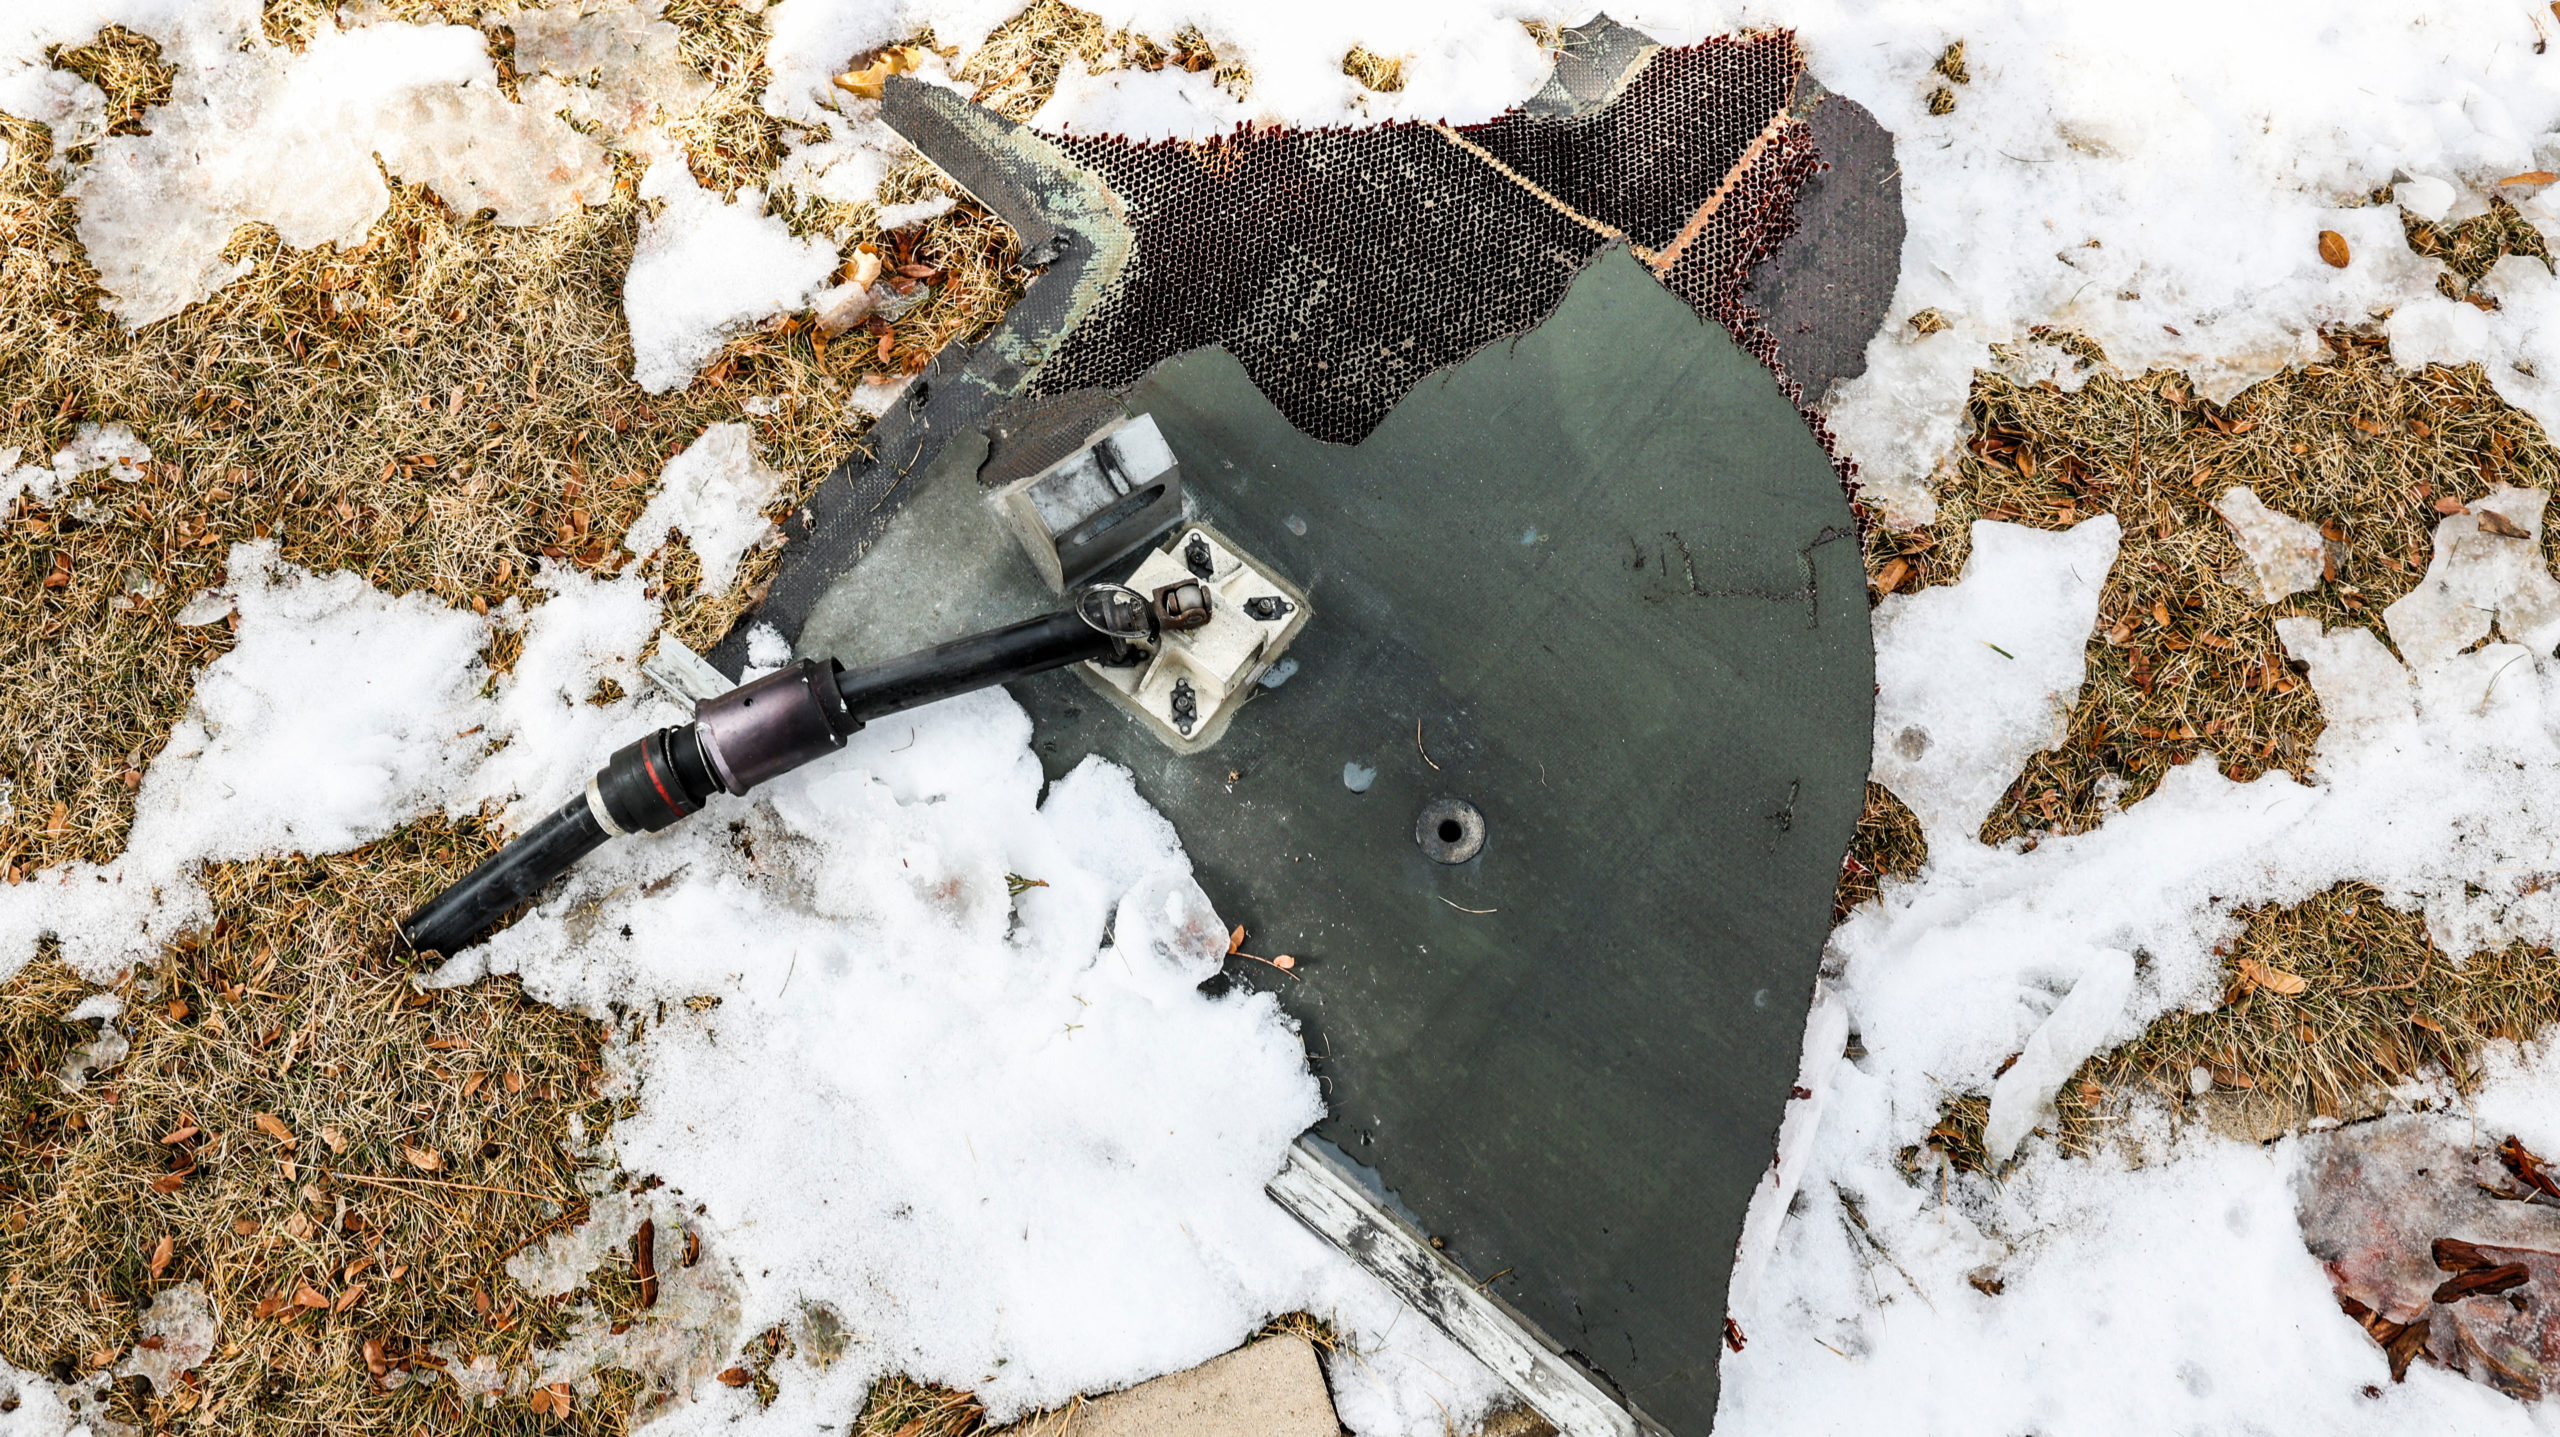 Pieces of an aeroplane engine from Flight 328 sit scattered in a neighbourhood on February 20, 2021 in Broomfield, Colorado. (Photo: Michael Ciaglo, Getty Images)